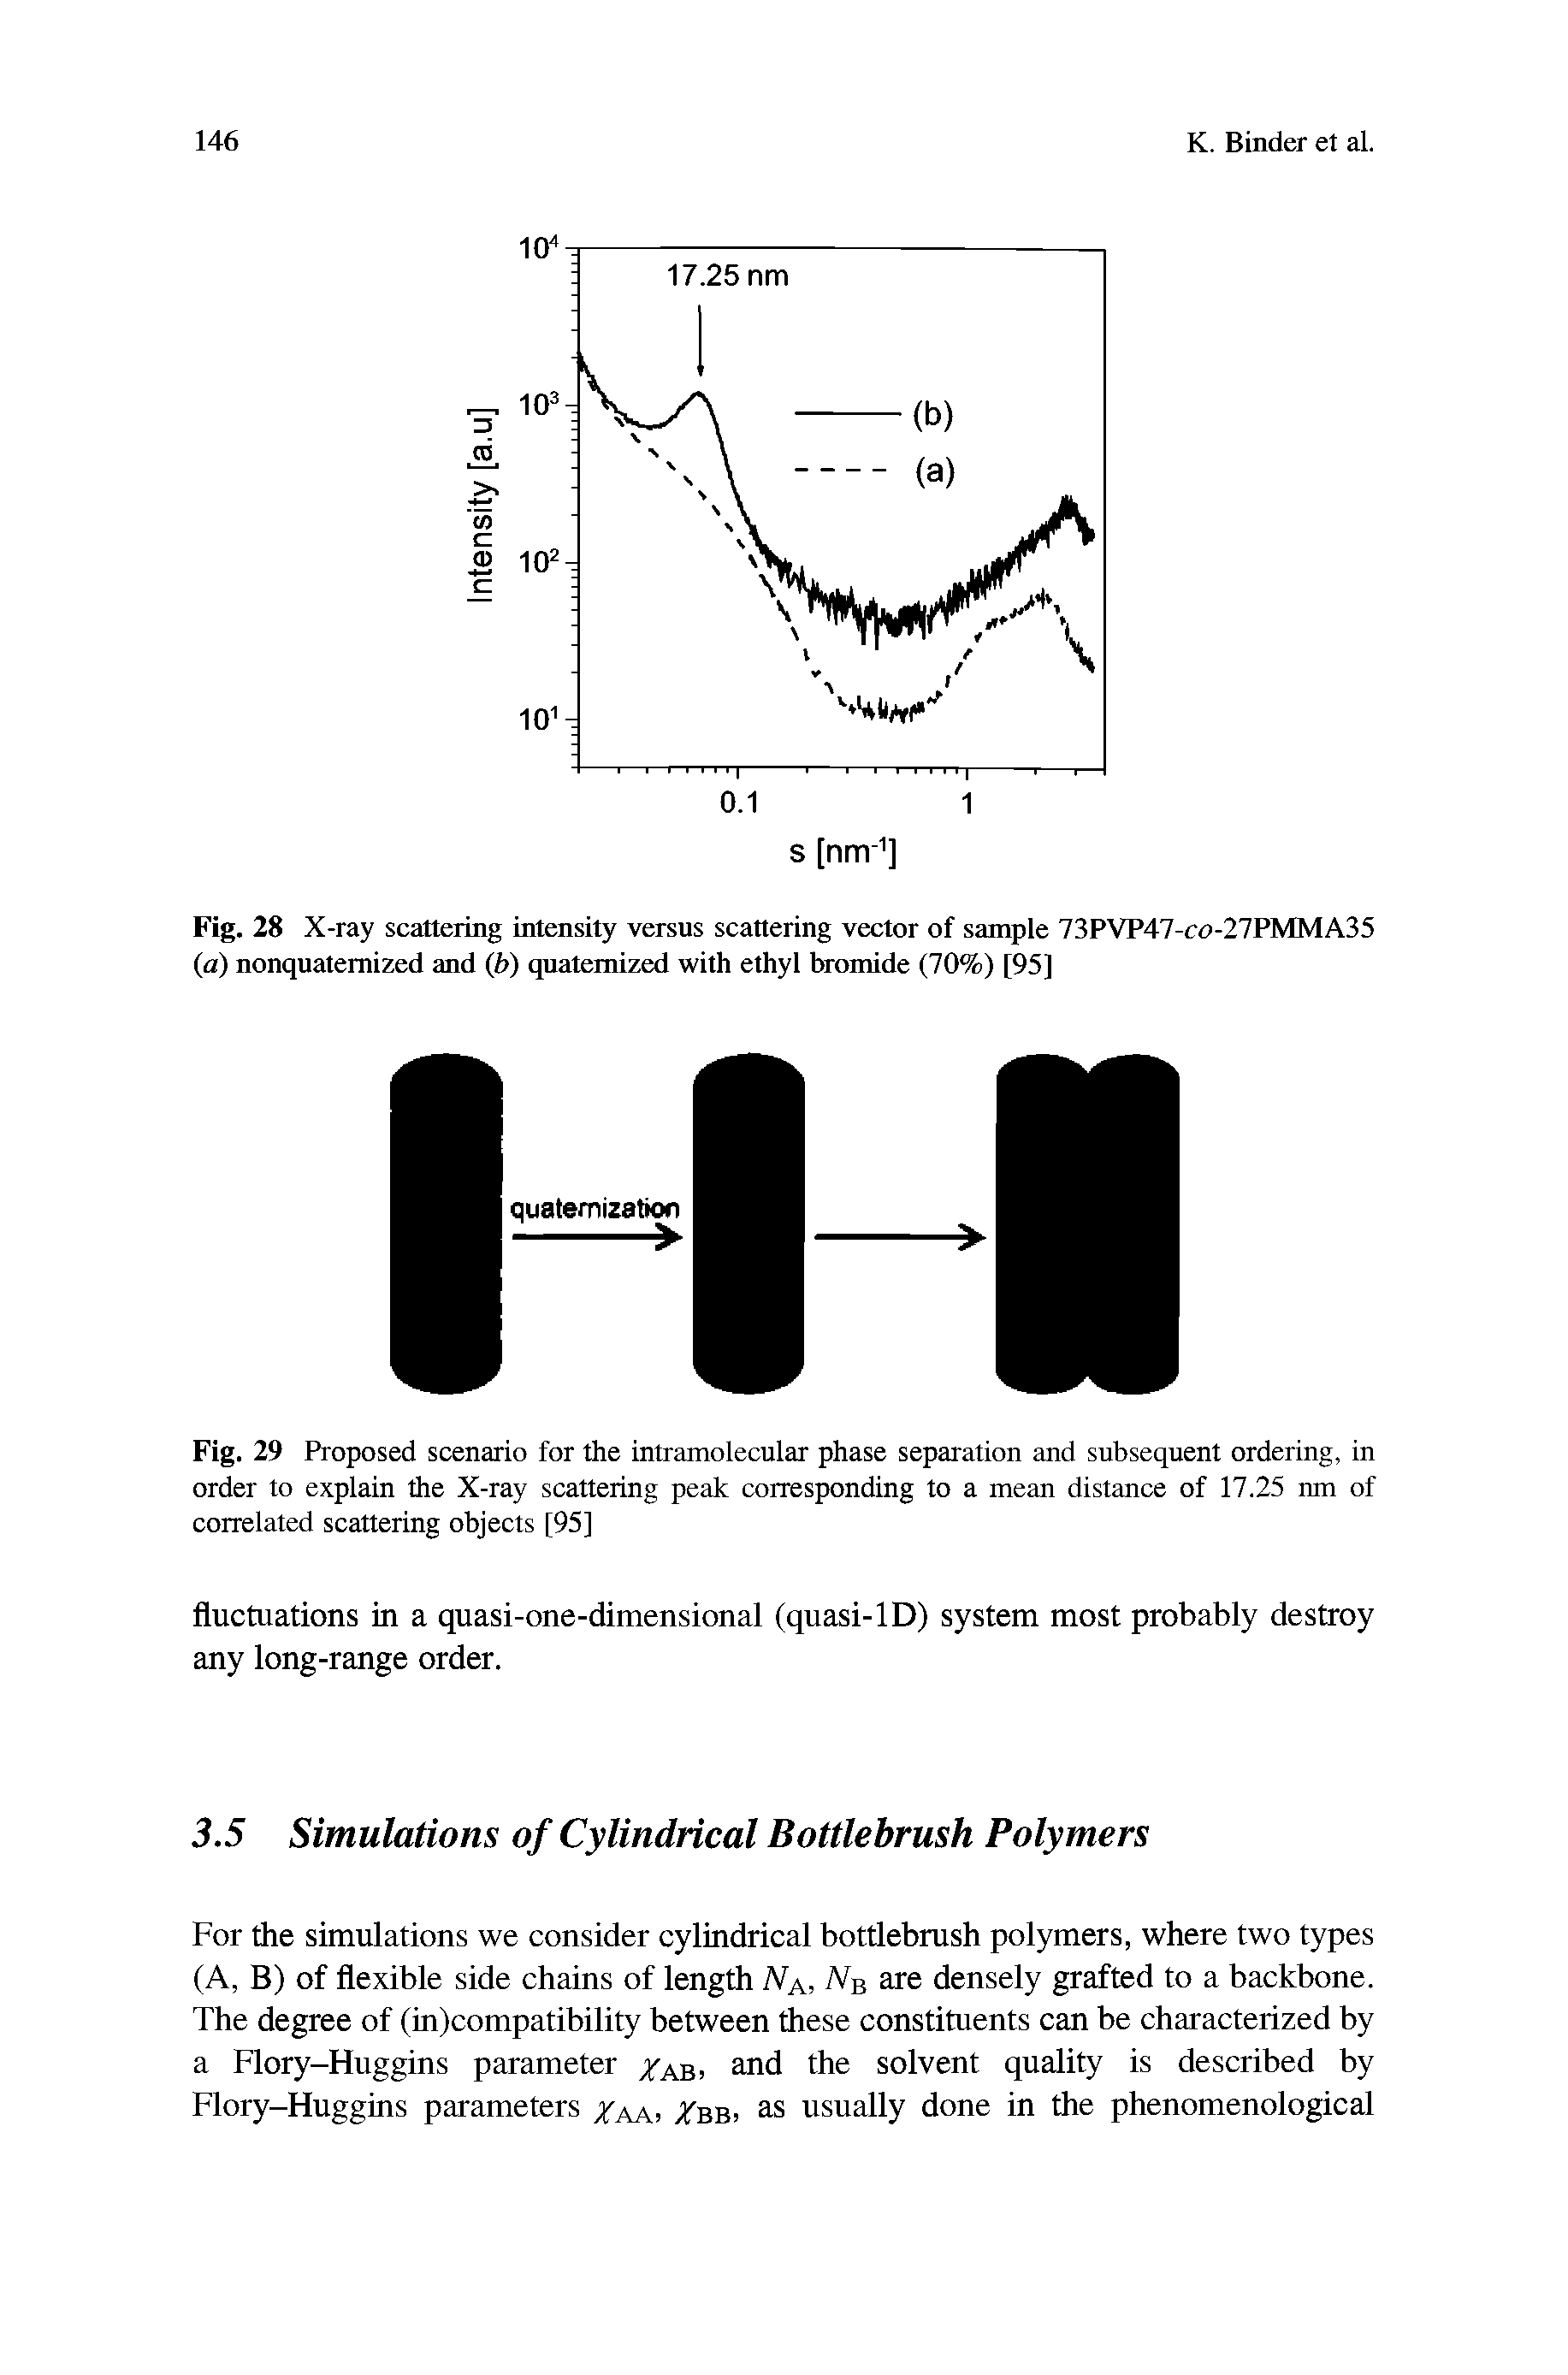 Fig. 29 Proposed scenario for the intramolecular phase separation and subsequent ordering, in order to explain the X-ray scattering peak corresponding to a mean distance of 17.25 nm of correlated scattering objects [95]...